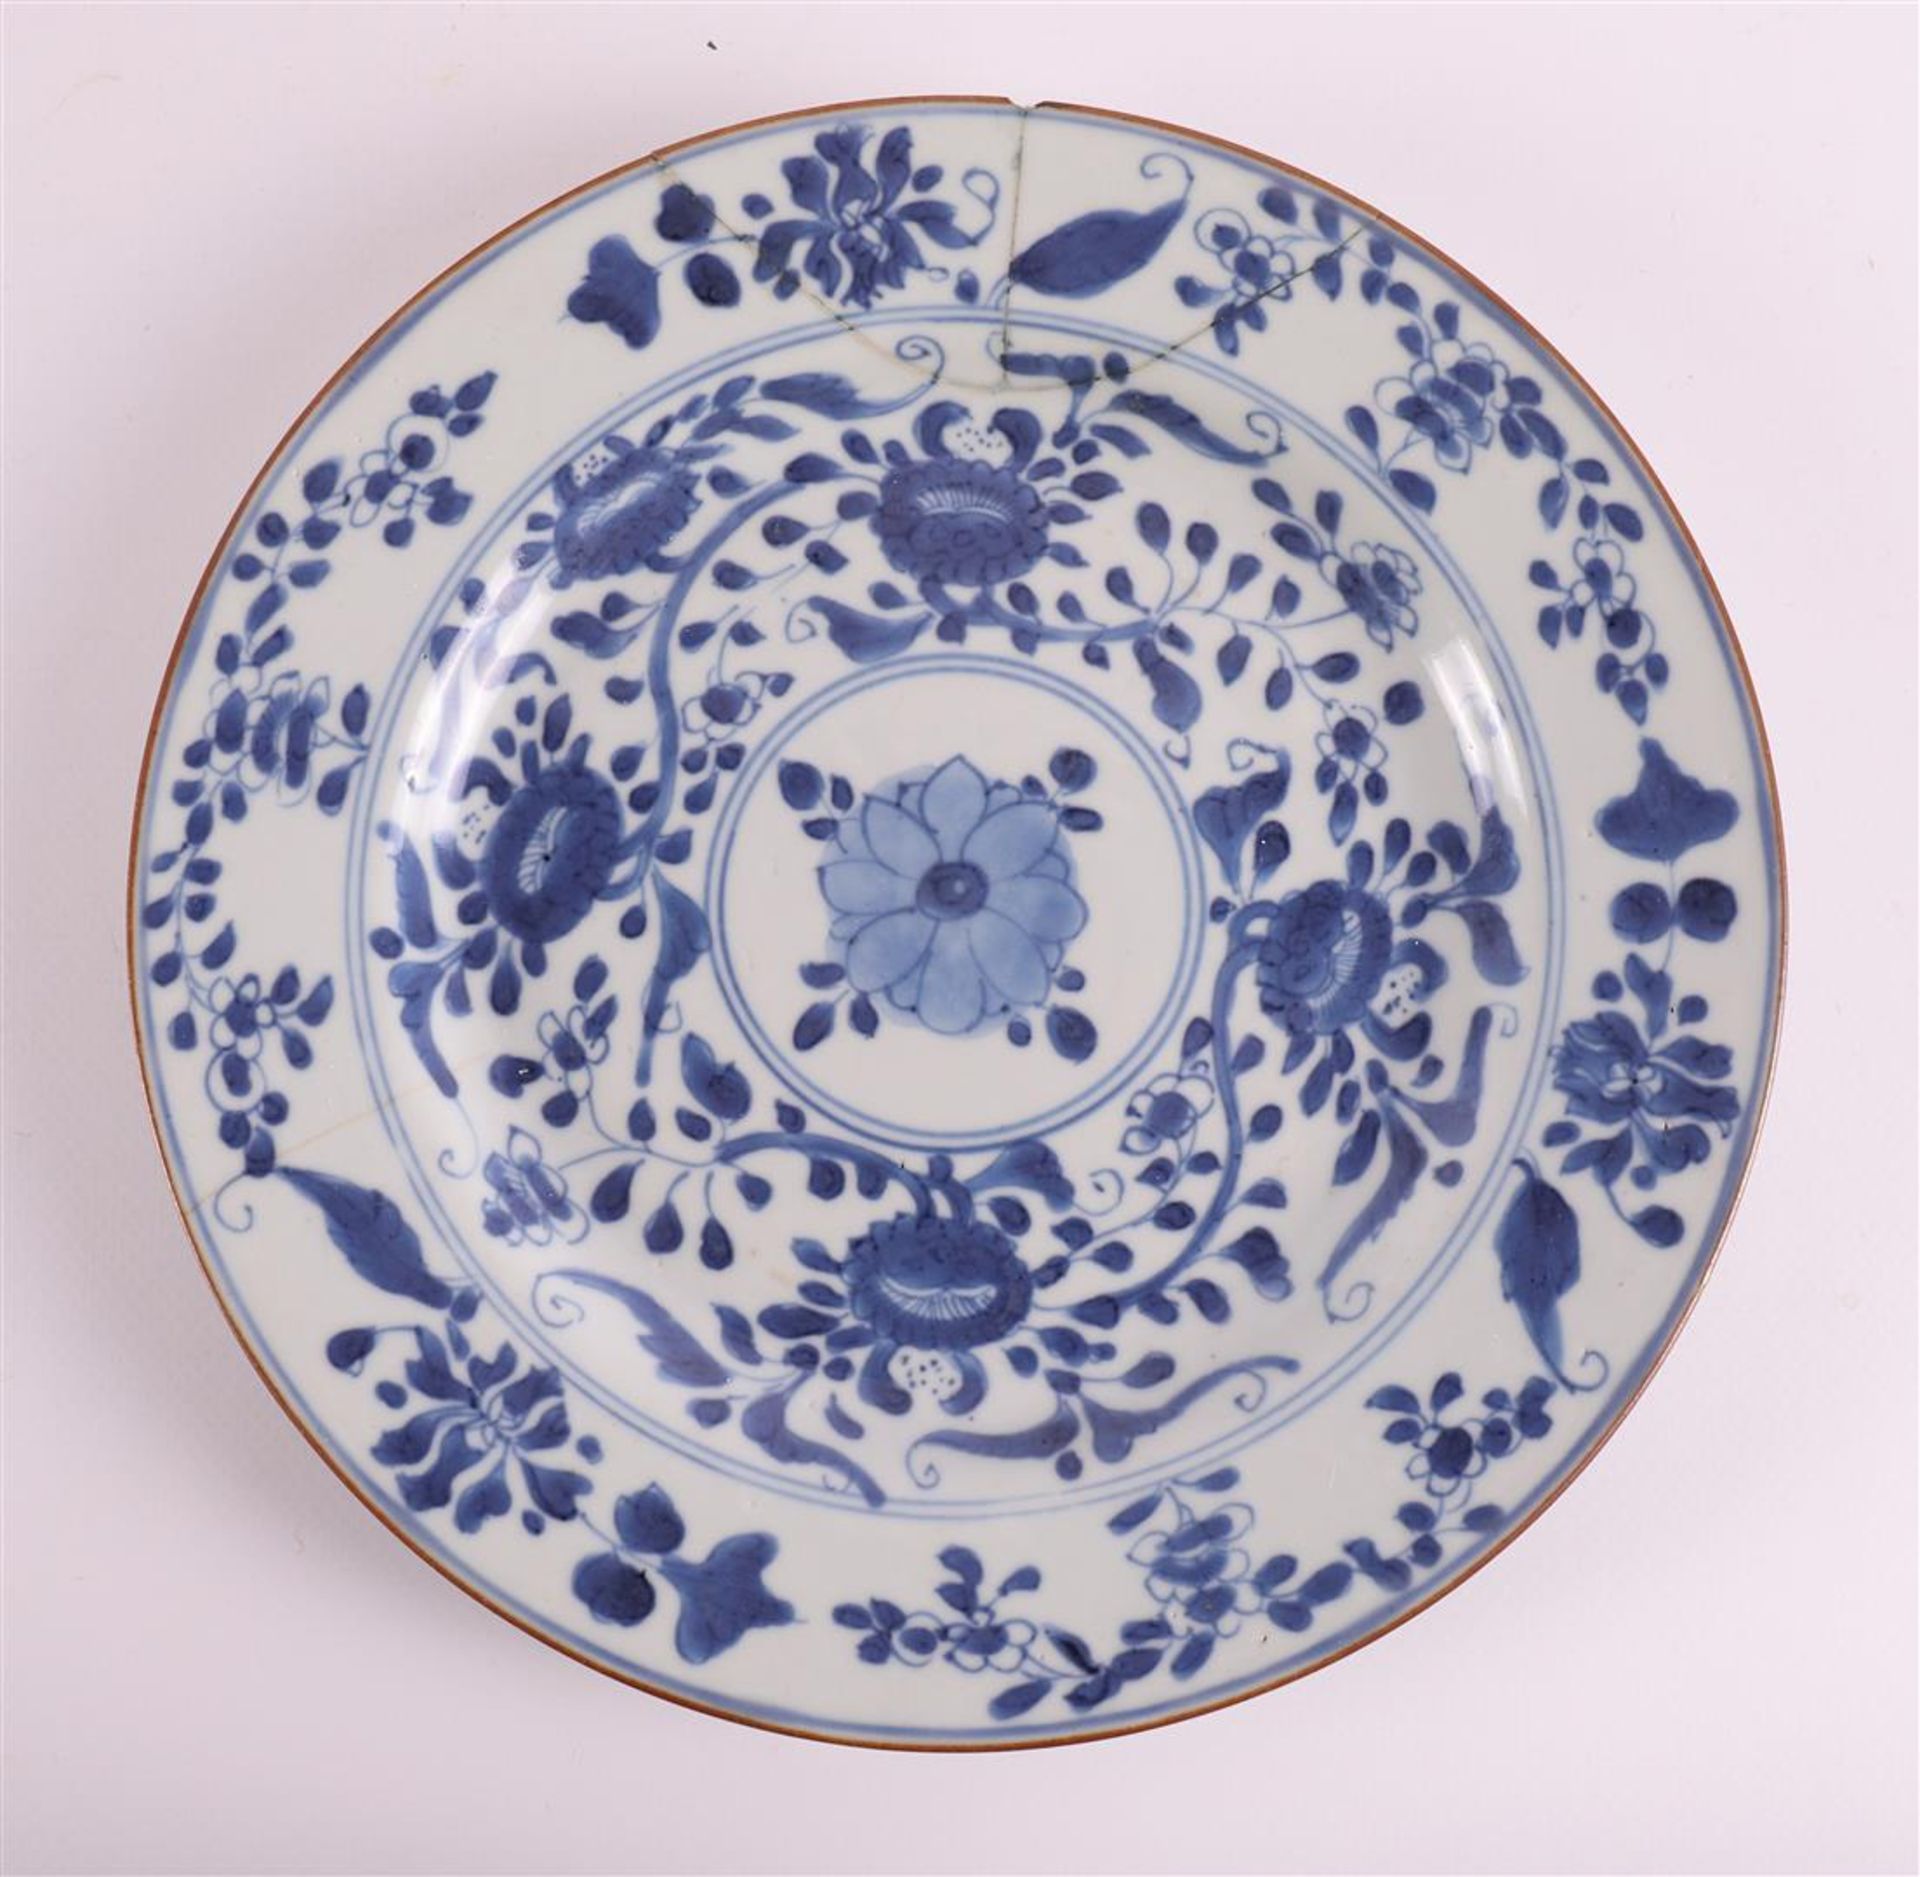 A set of blue/white porcelain plates, China, 18th/19th century. - Image 4 of 14